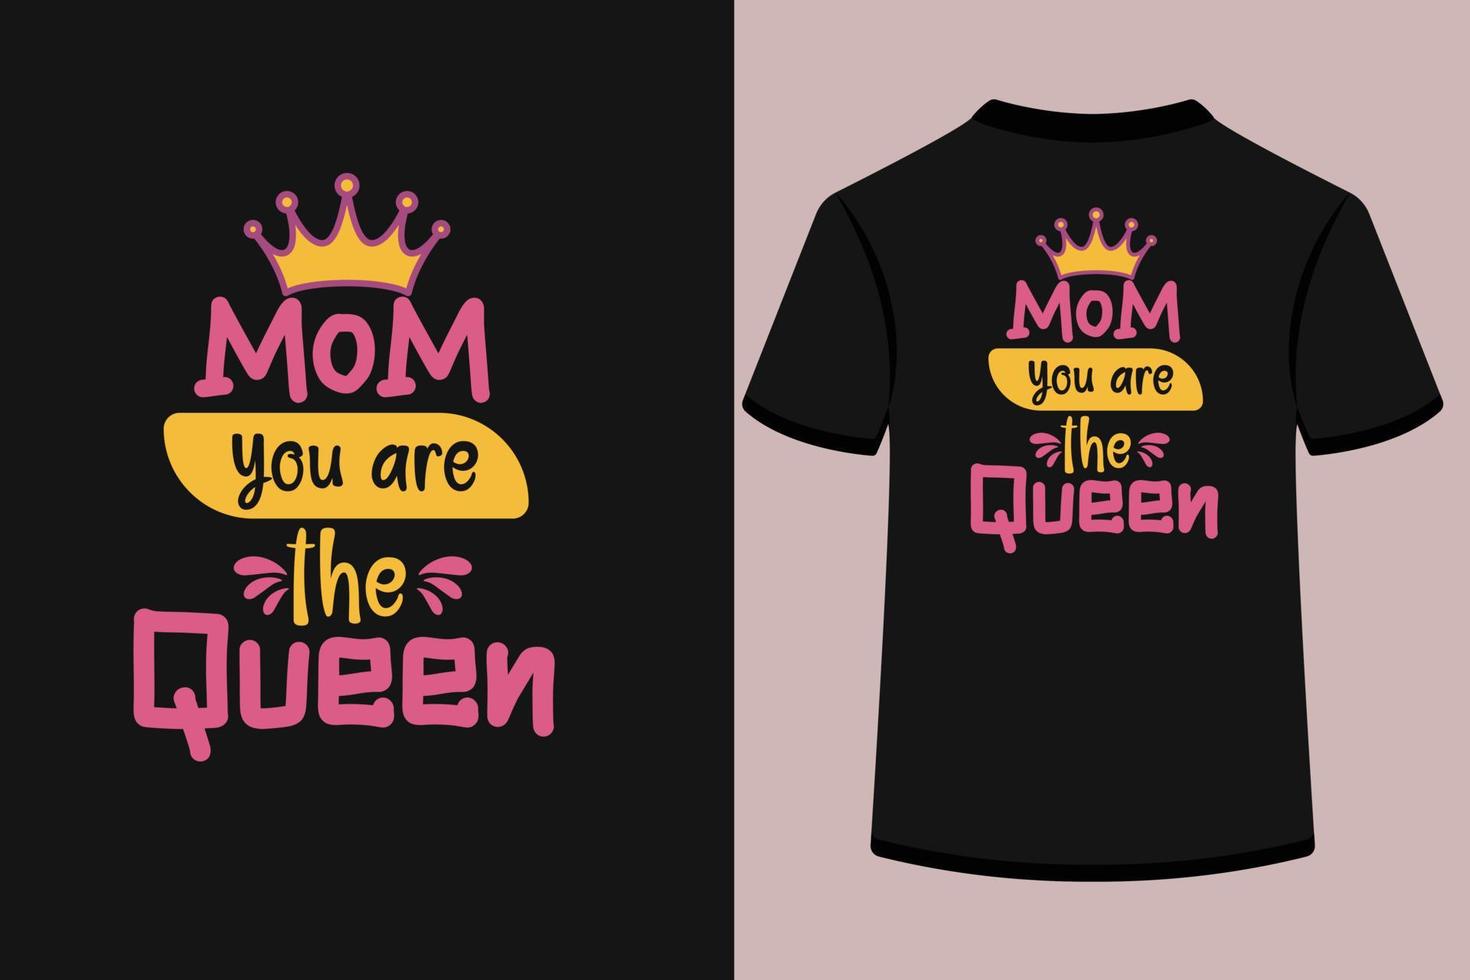 Mom you are the queen tshirt design vector